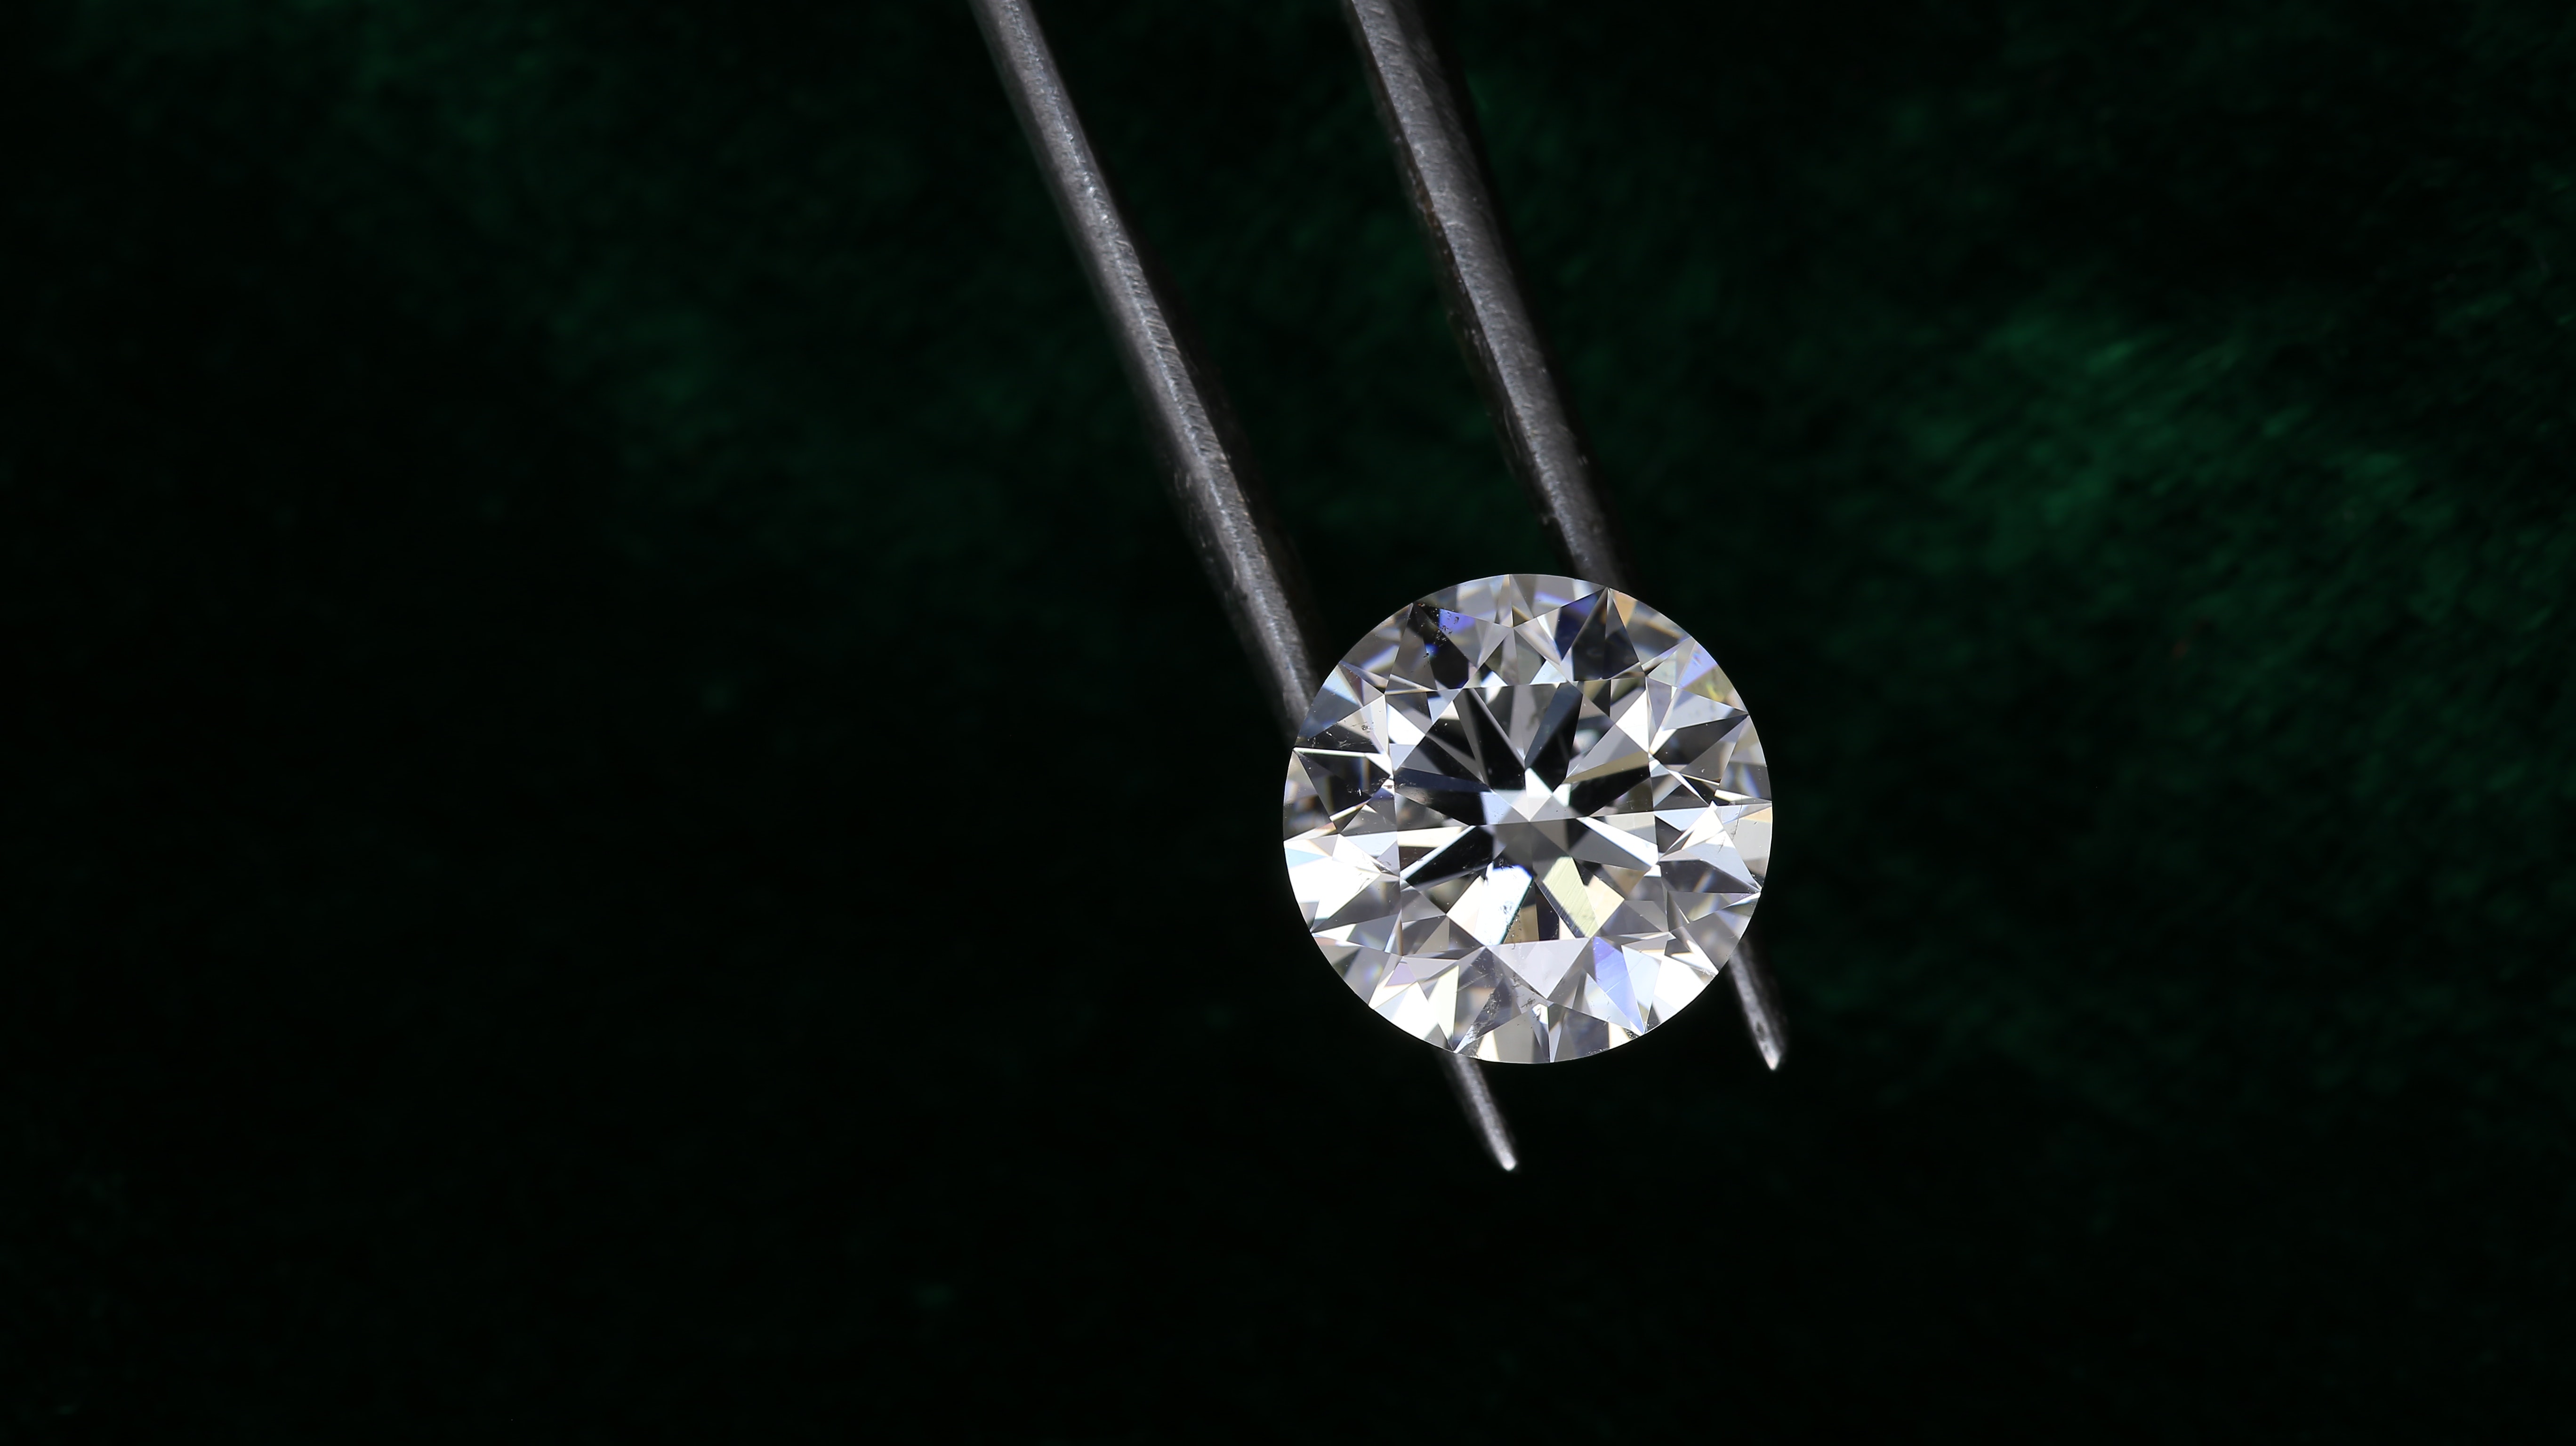 Diamond Grading: What It Means for Your Purchase